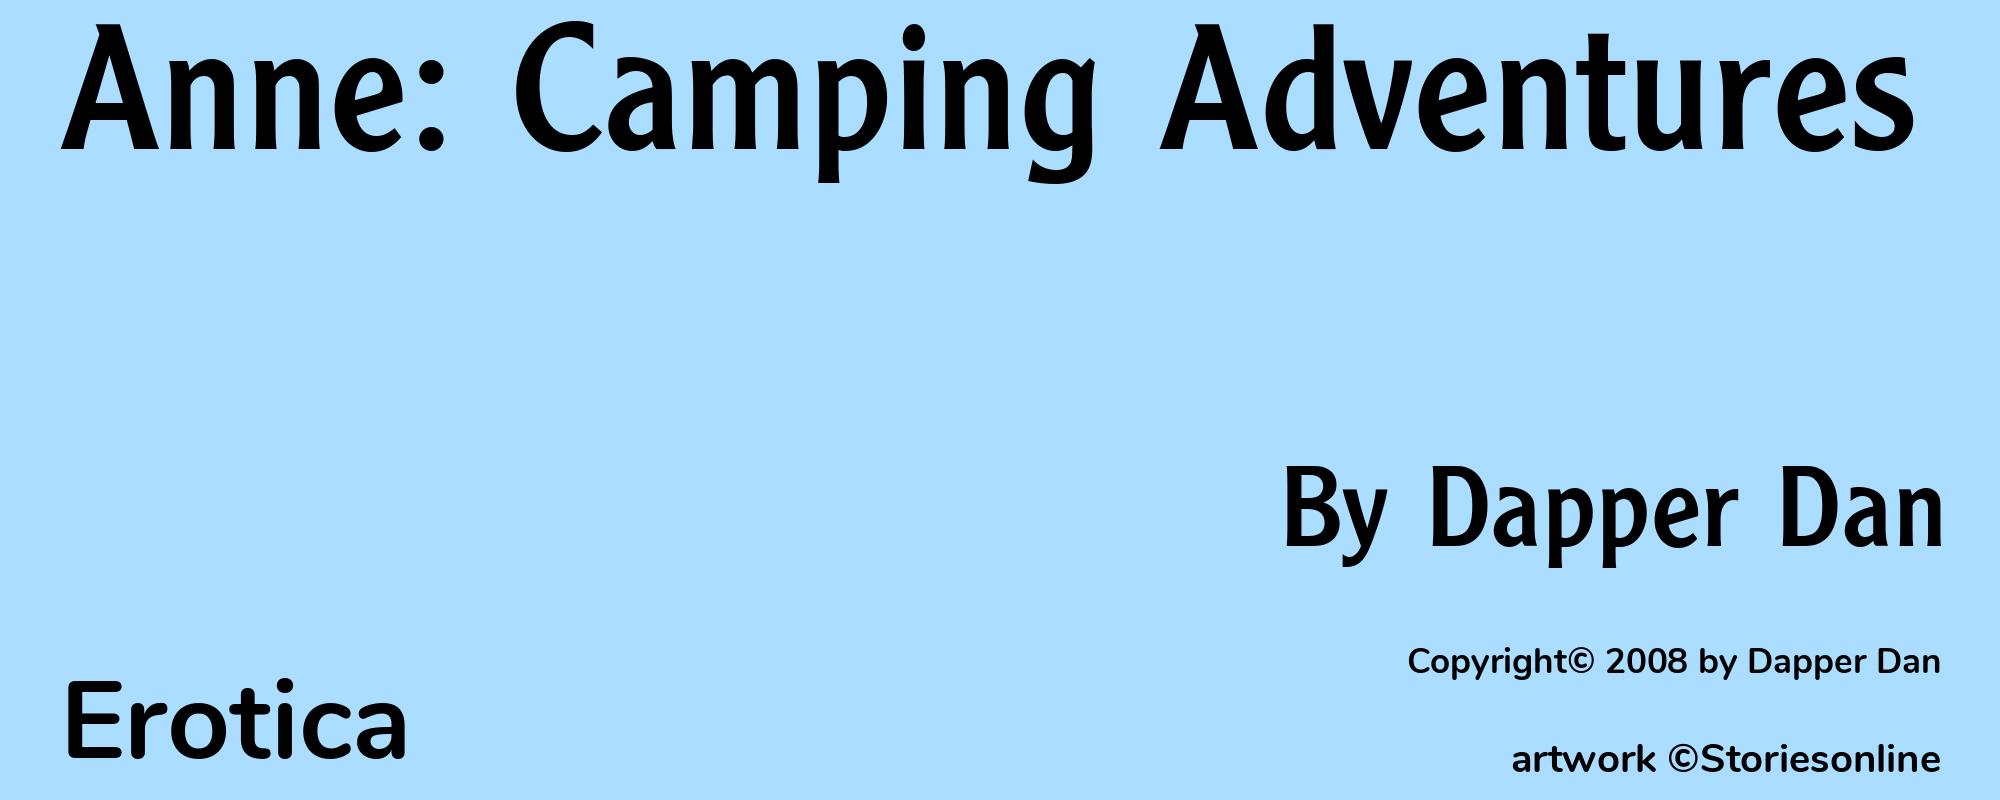 Anne: Camping Adventures - Cover